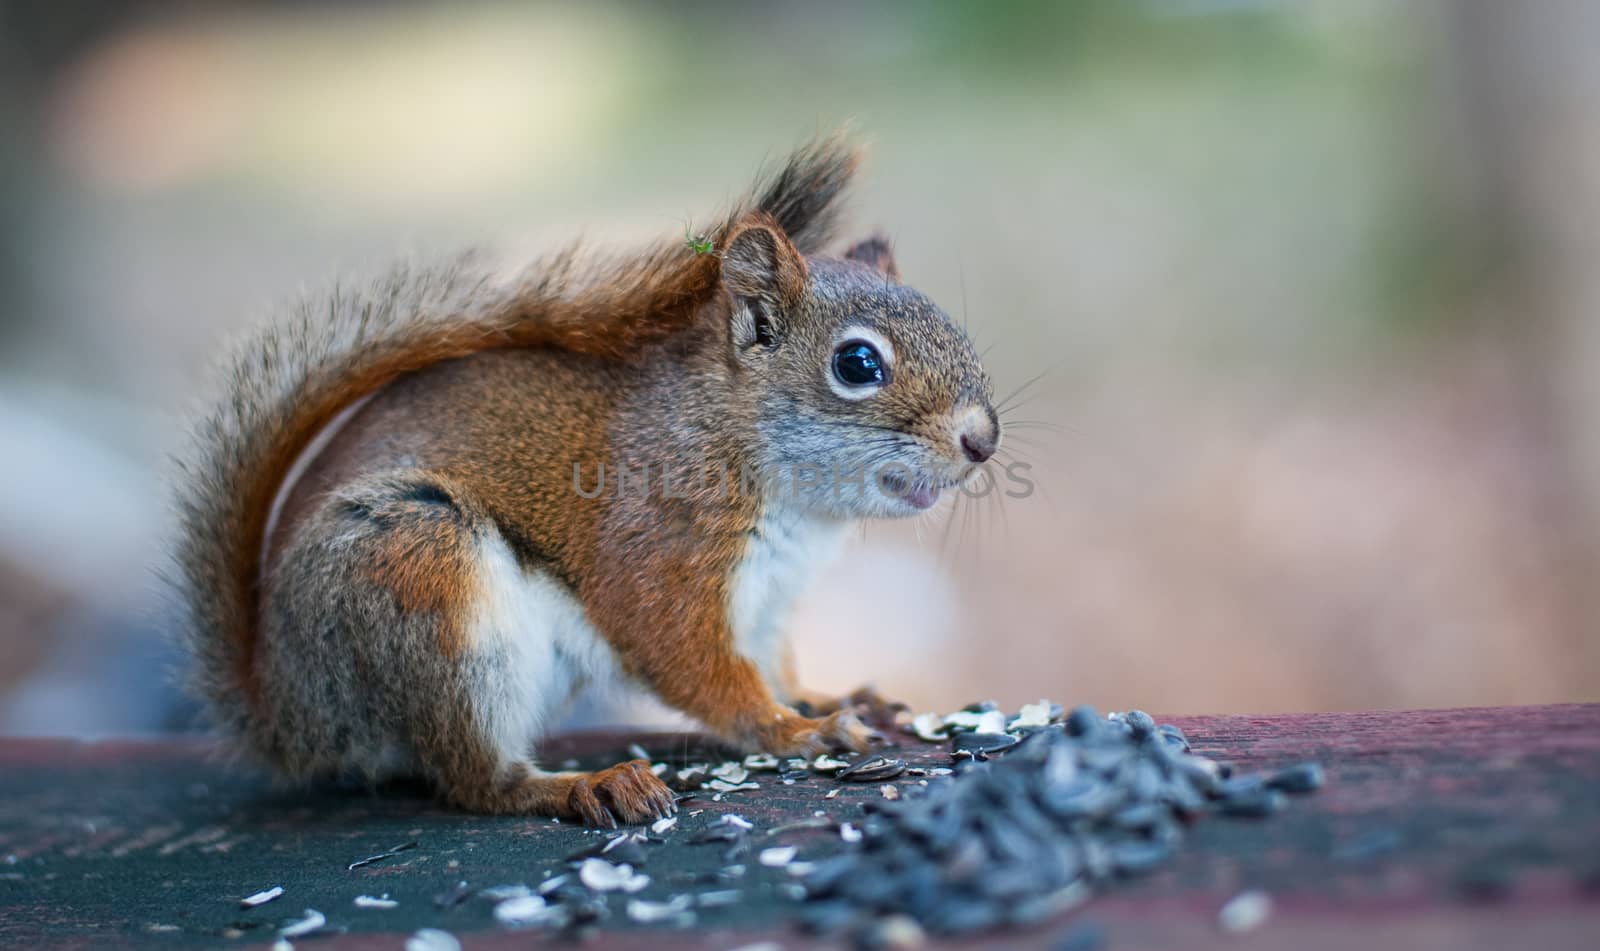 Red squirrel visitor.  A small red squirrel investigating an offering of sunflower seeds. by valleyboi63